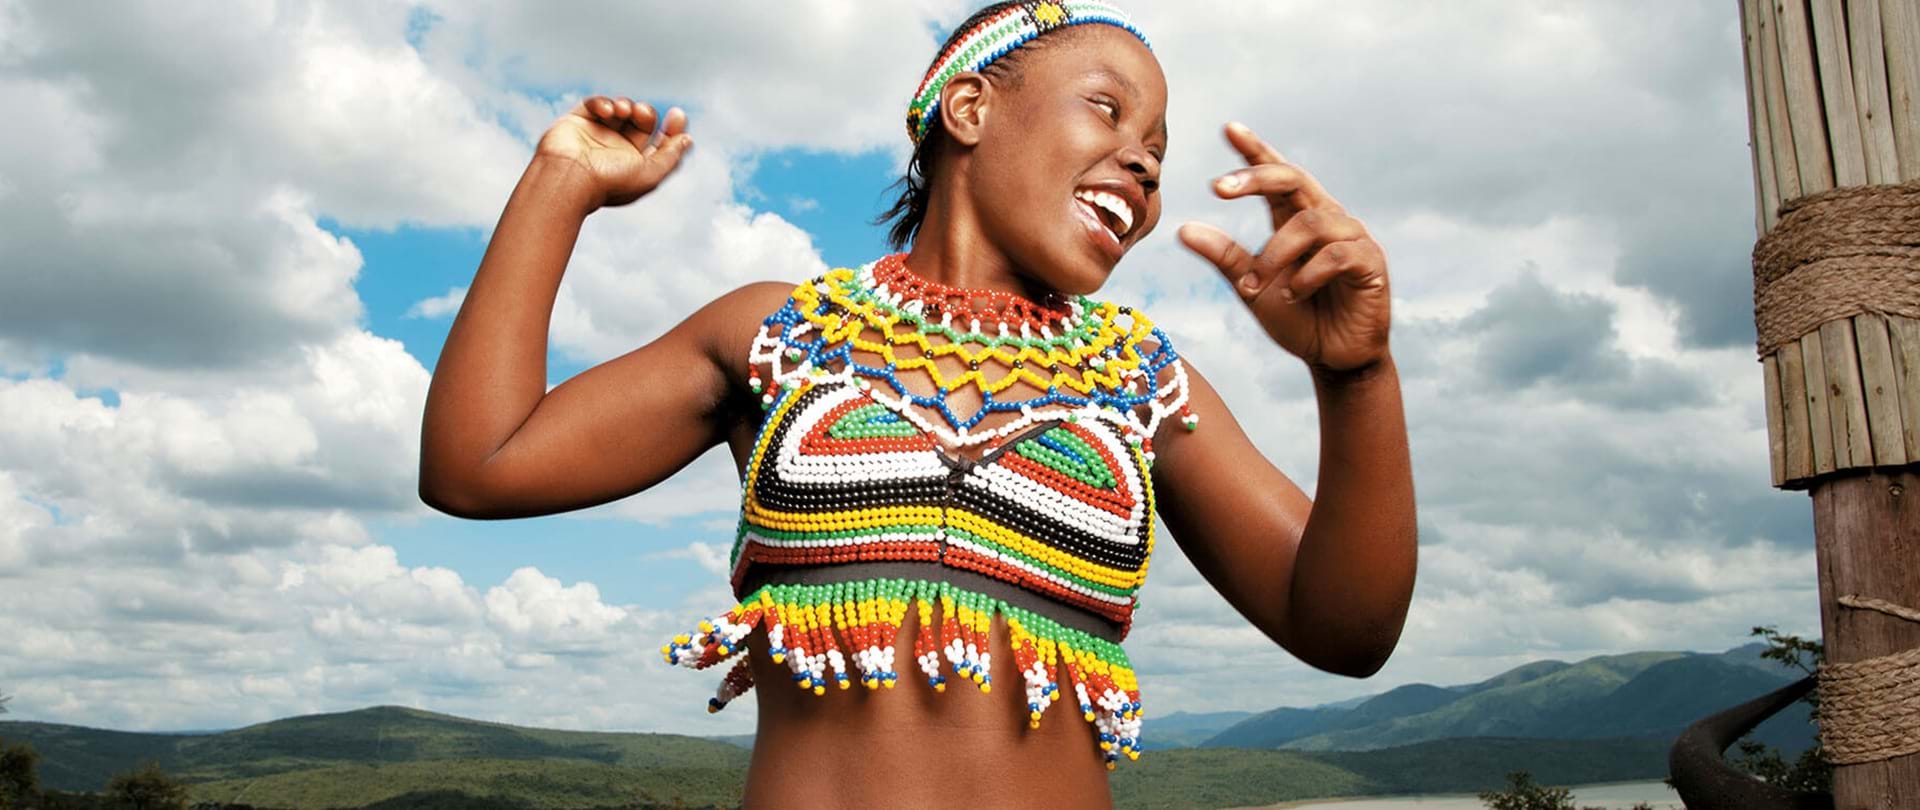 A young Zulu girl from the waist up with colourful ytraditional designs covering her torso and forehead. Her head is to the side and it looks like she is jumping against a background of a green valley and blue sky.